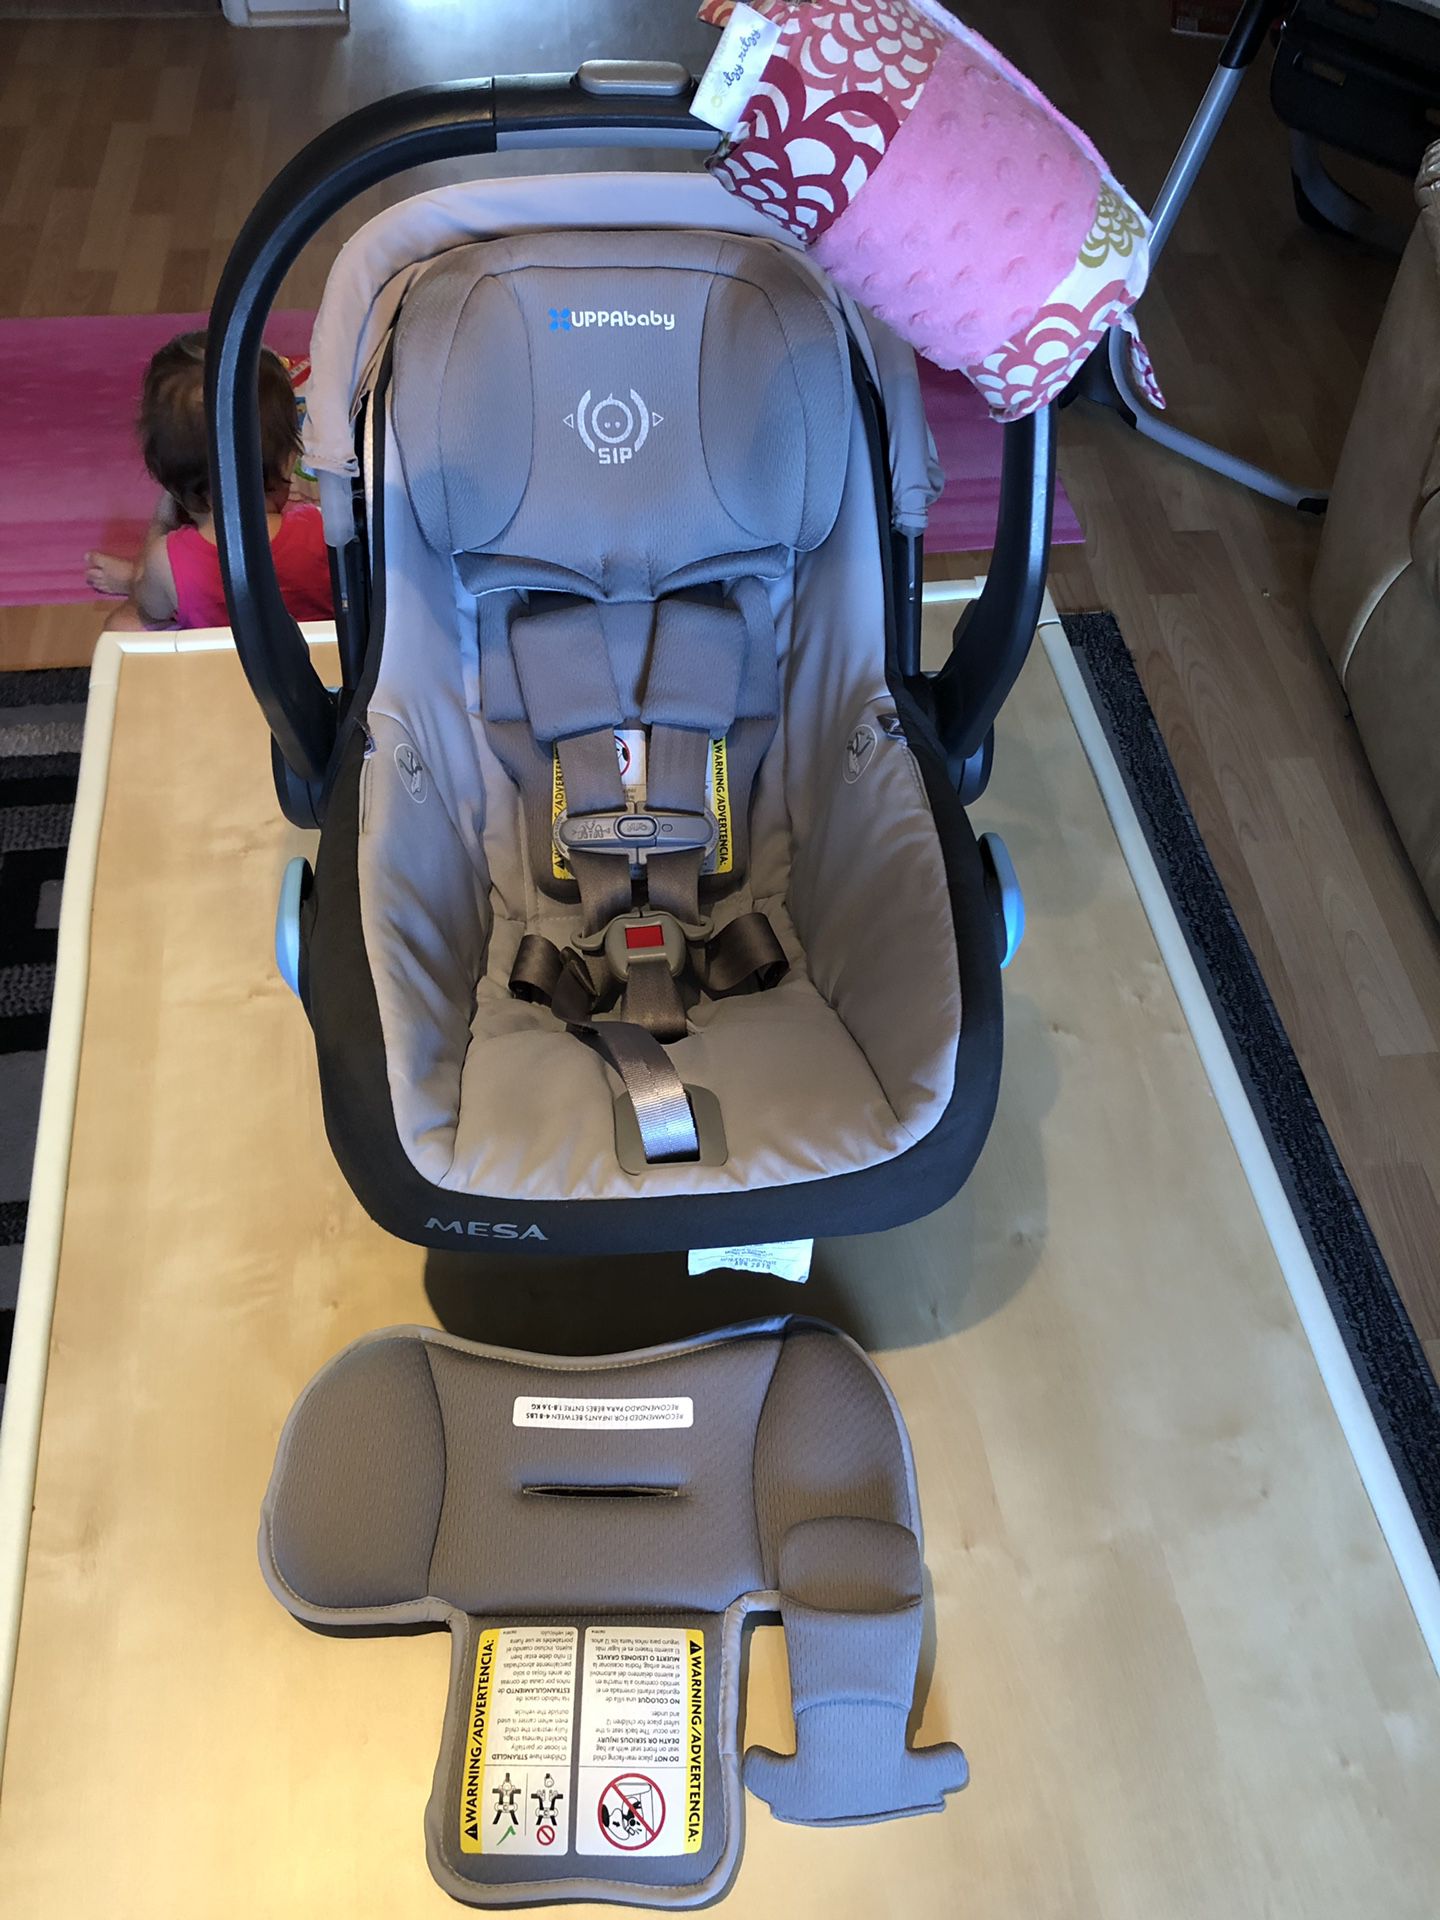 UPPAbaby MESA car seat with base and adapters